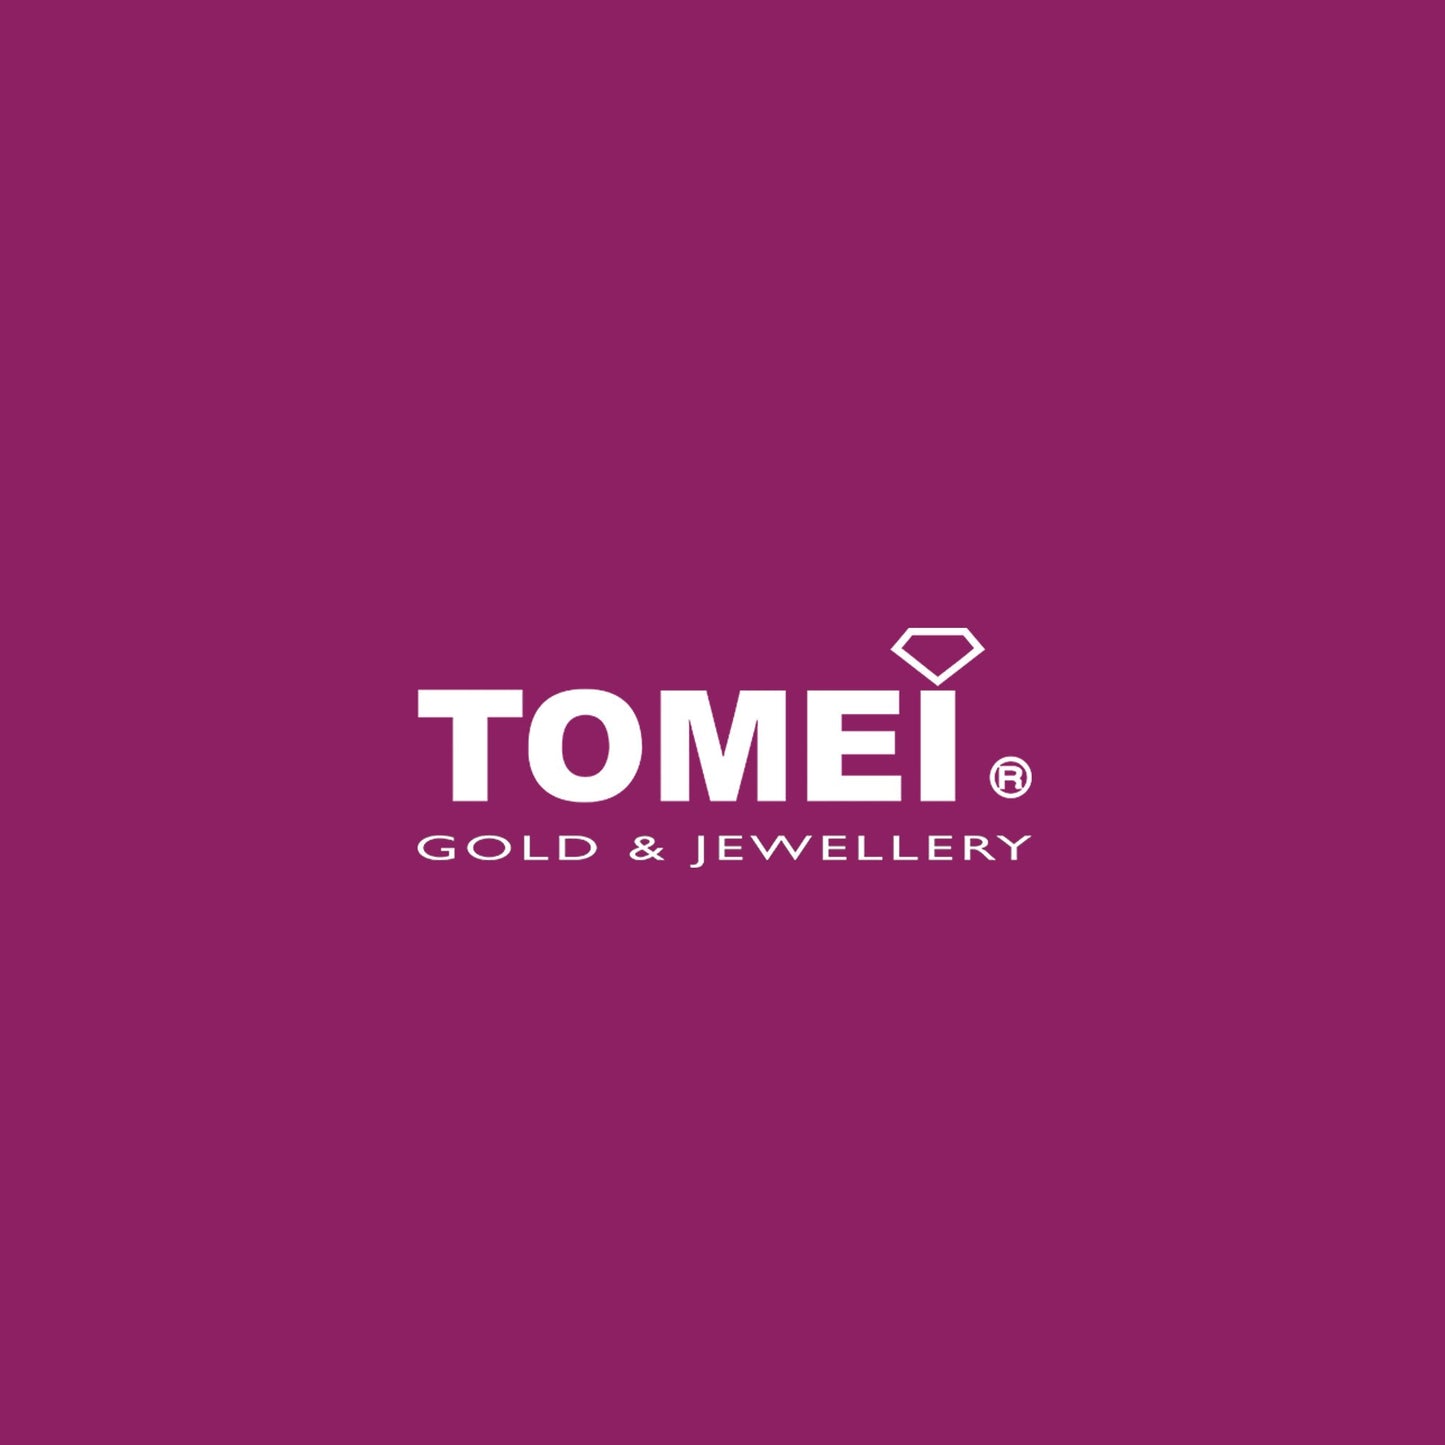 TOMEI Rouge Collection Link Chain Bracelet, Rose Gold 750